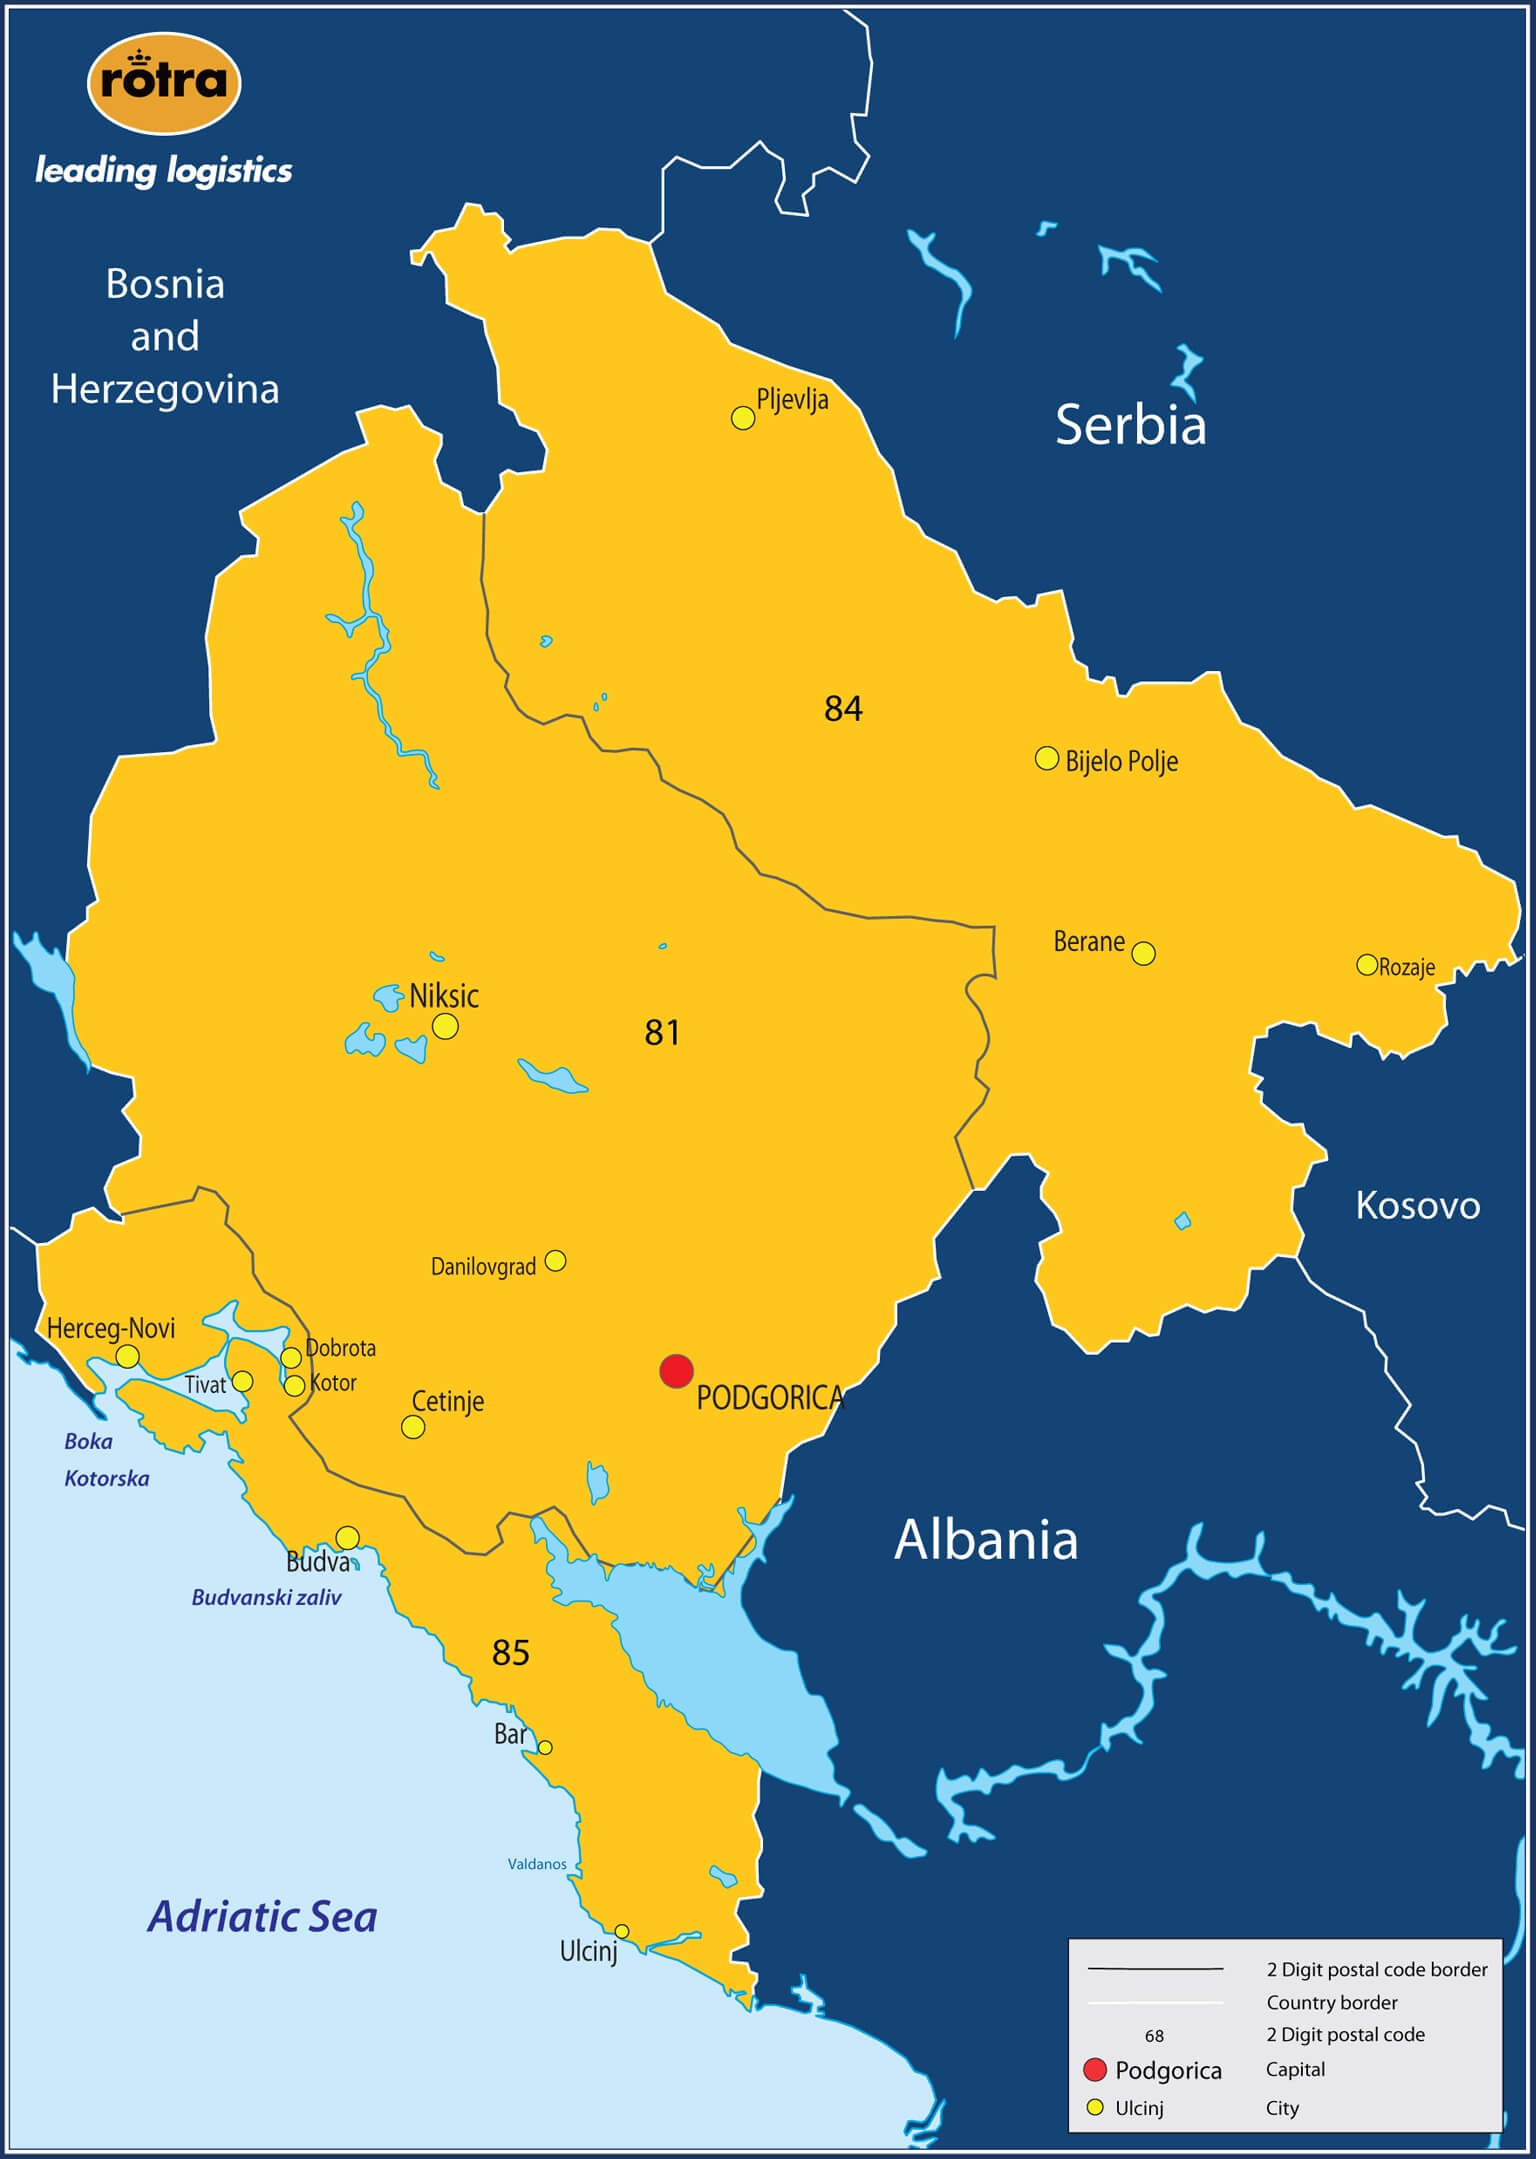 europe-countries-map-montenegro-montenegro-europe-countries-map-and